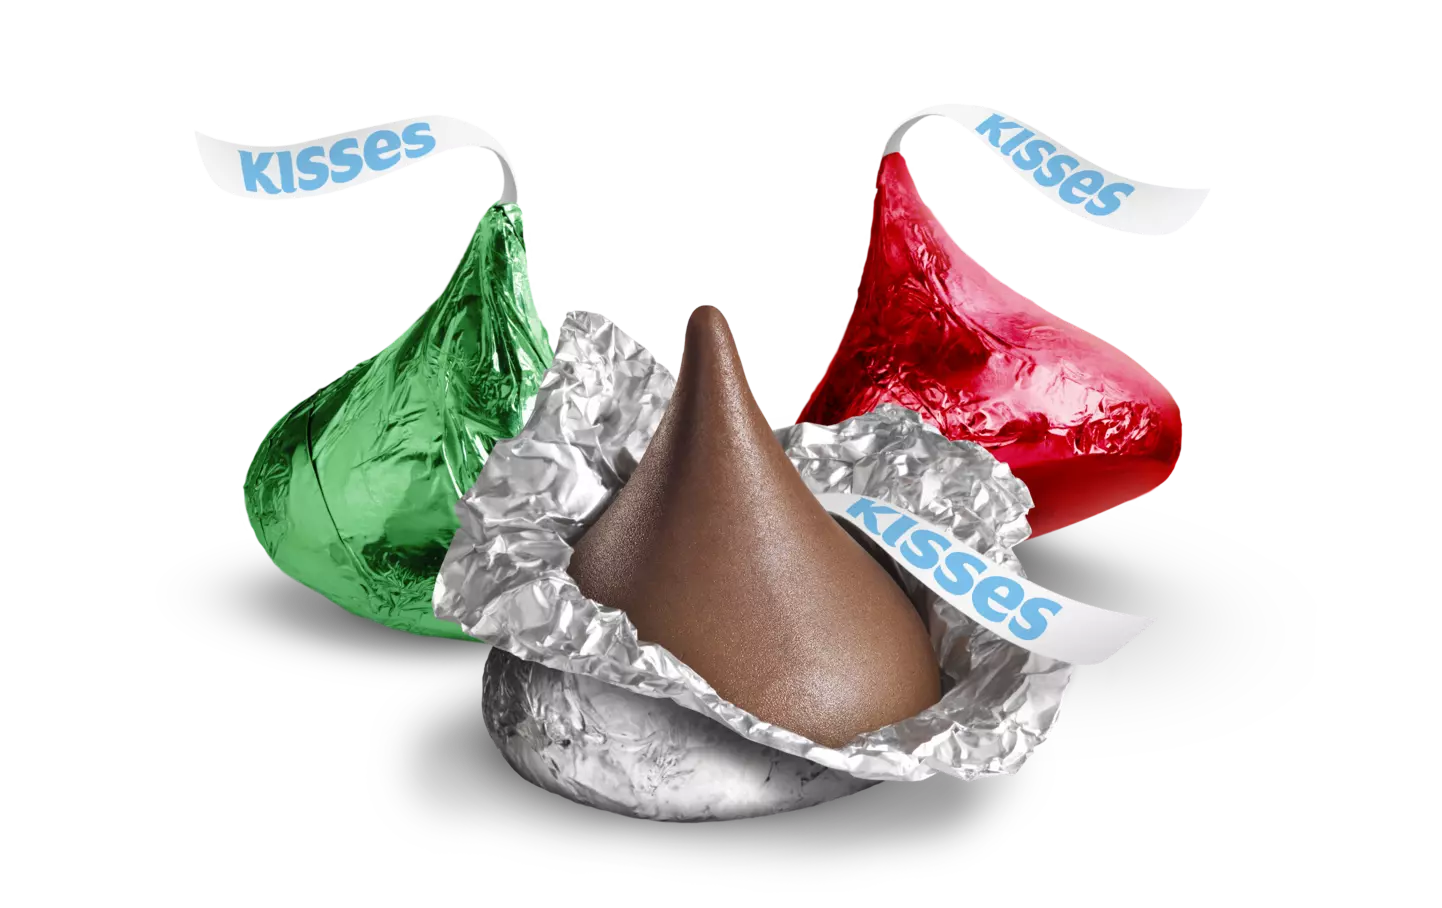 HERSHEY'S KISSES Holiday Milk Chocolate Candy, 1.44 oz sleeve - Out of Package